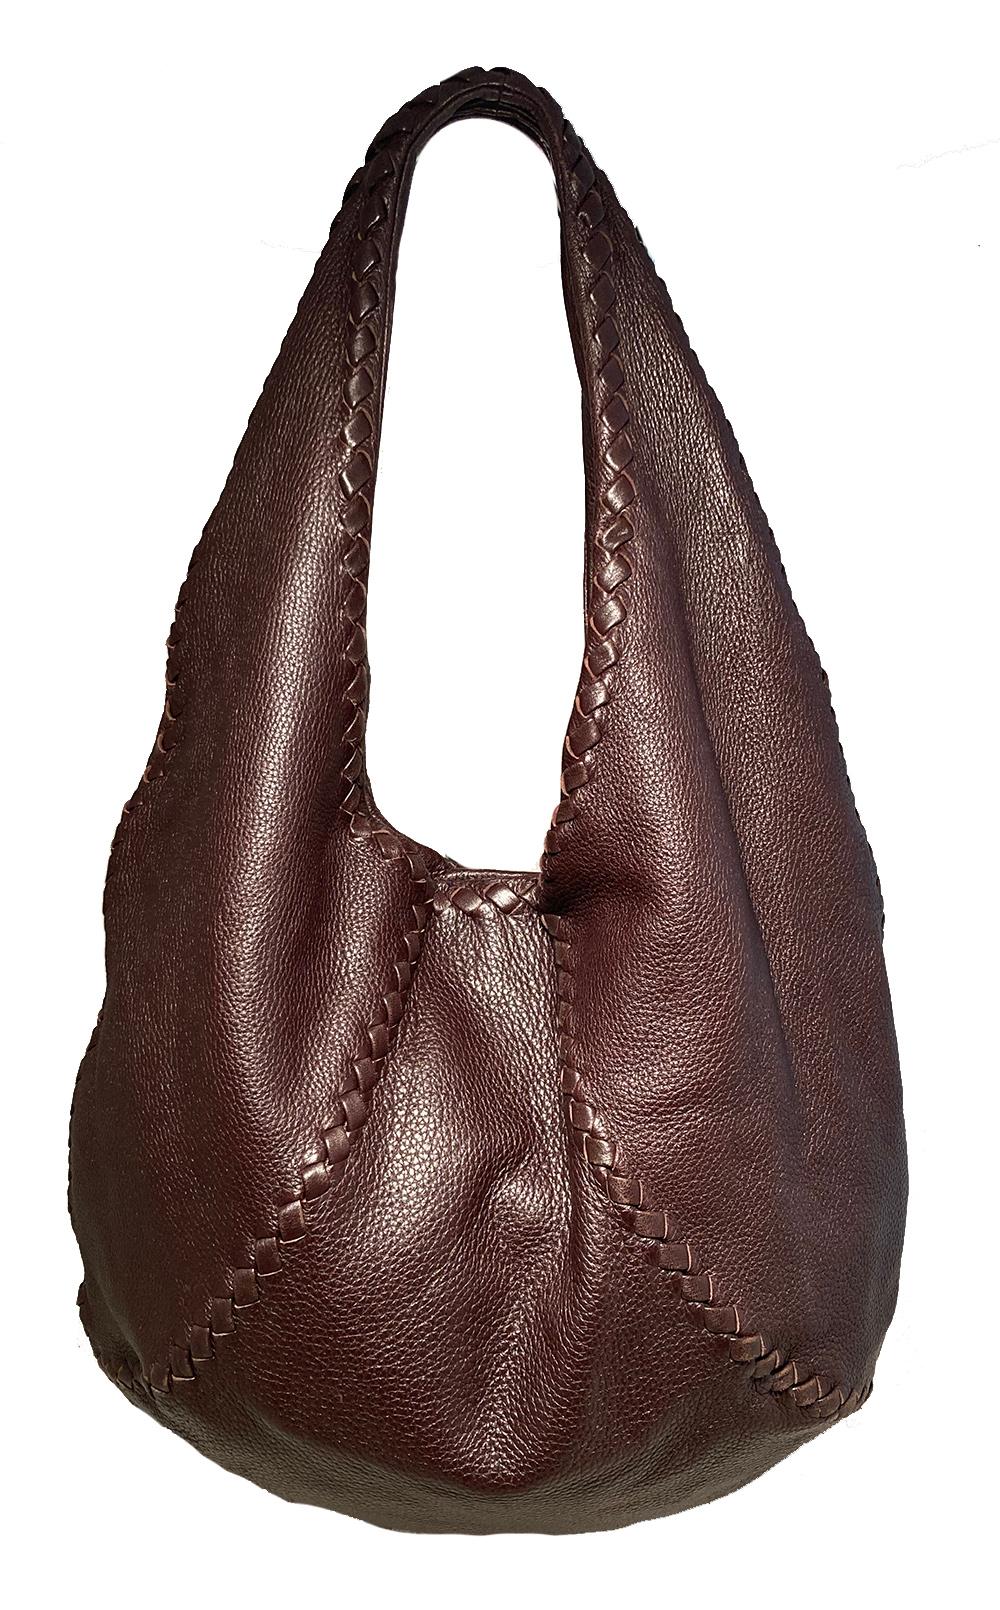 Bottega Veneta Brown Leather Baseball Hobo Bag in very good condition. Soft brown leather exterior in unique hobo style with braided woven leather edges similar to the woven stitching on a baseball. Magnetic top closure. Beige suede interior with